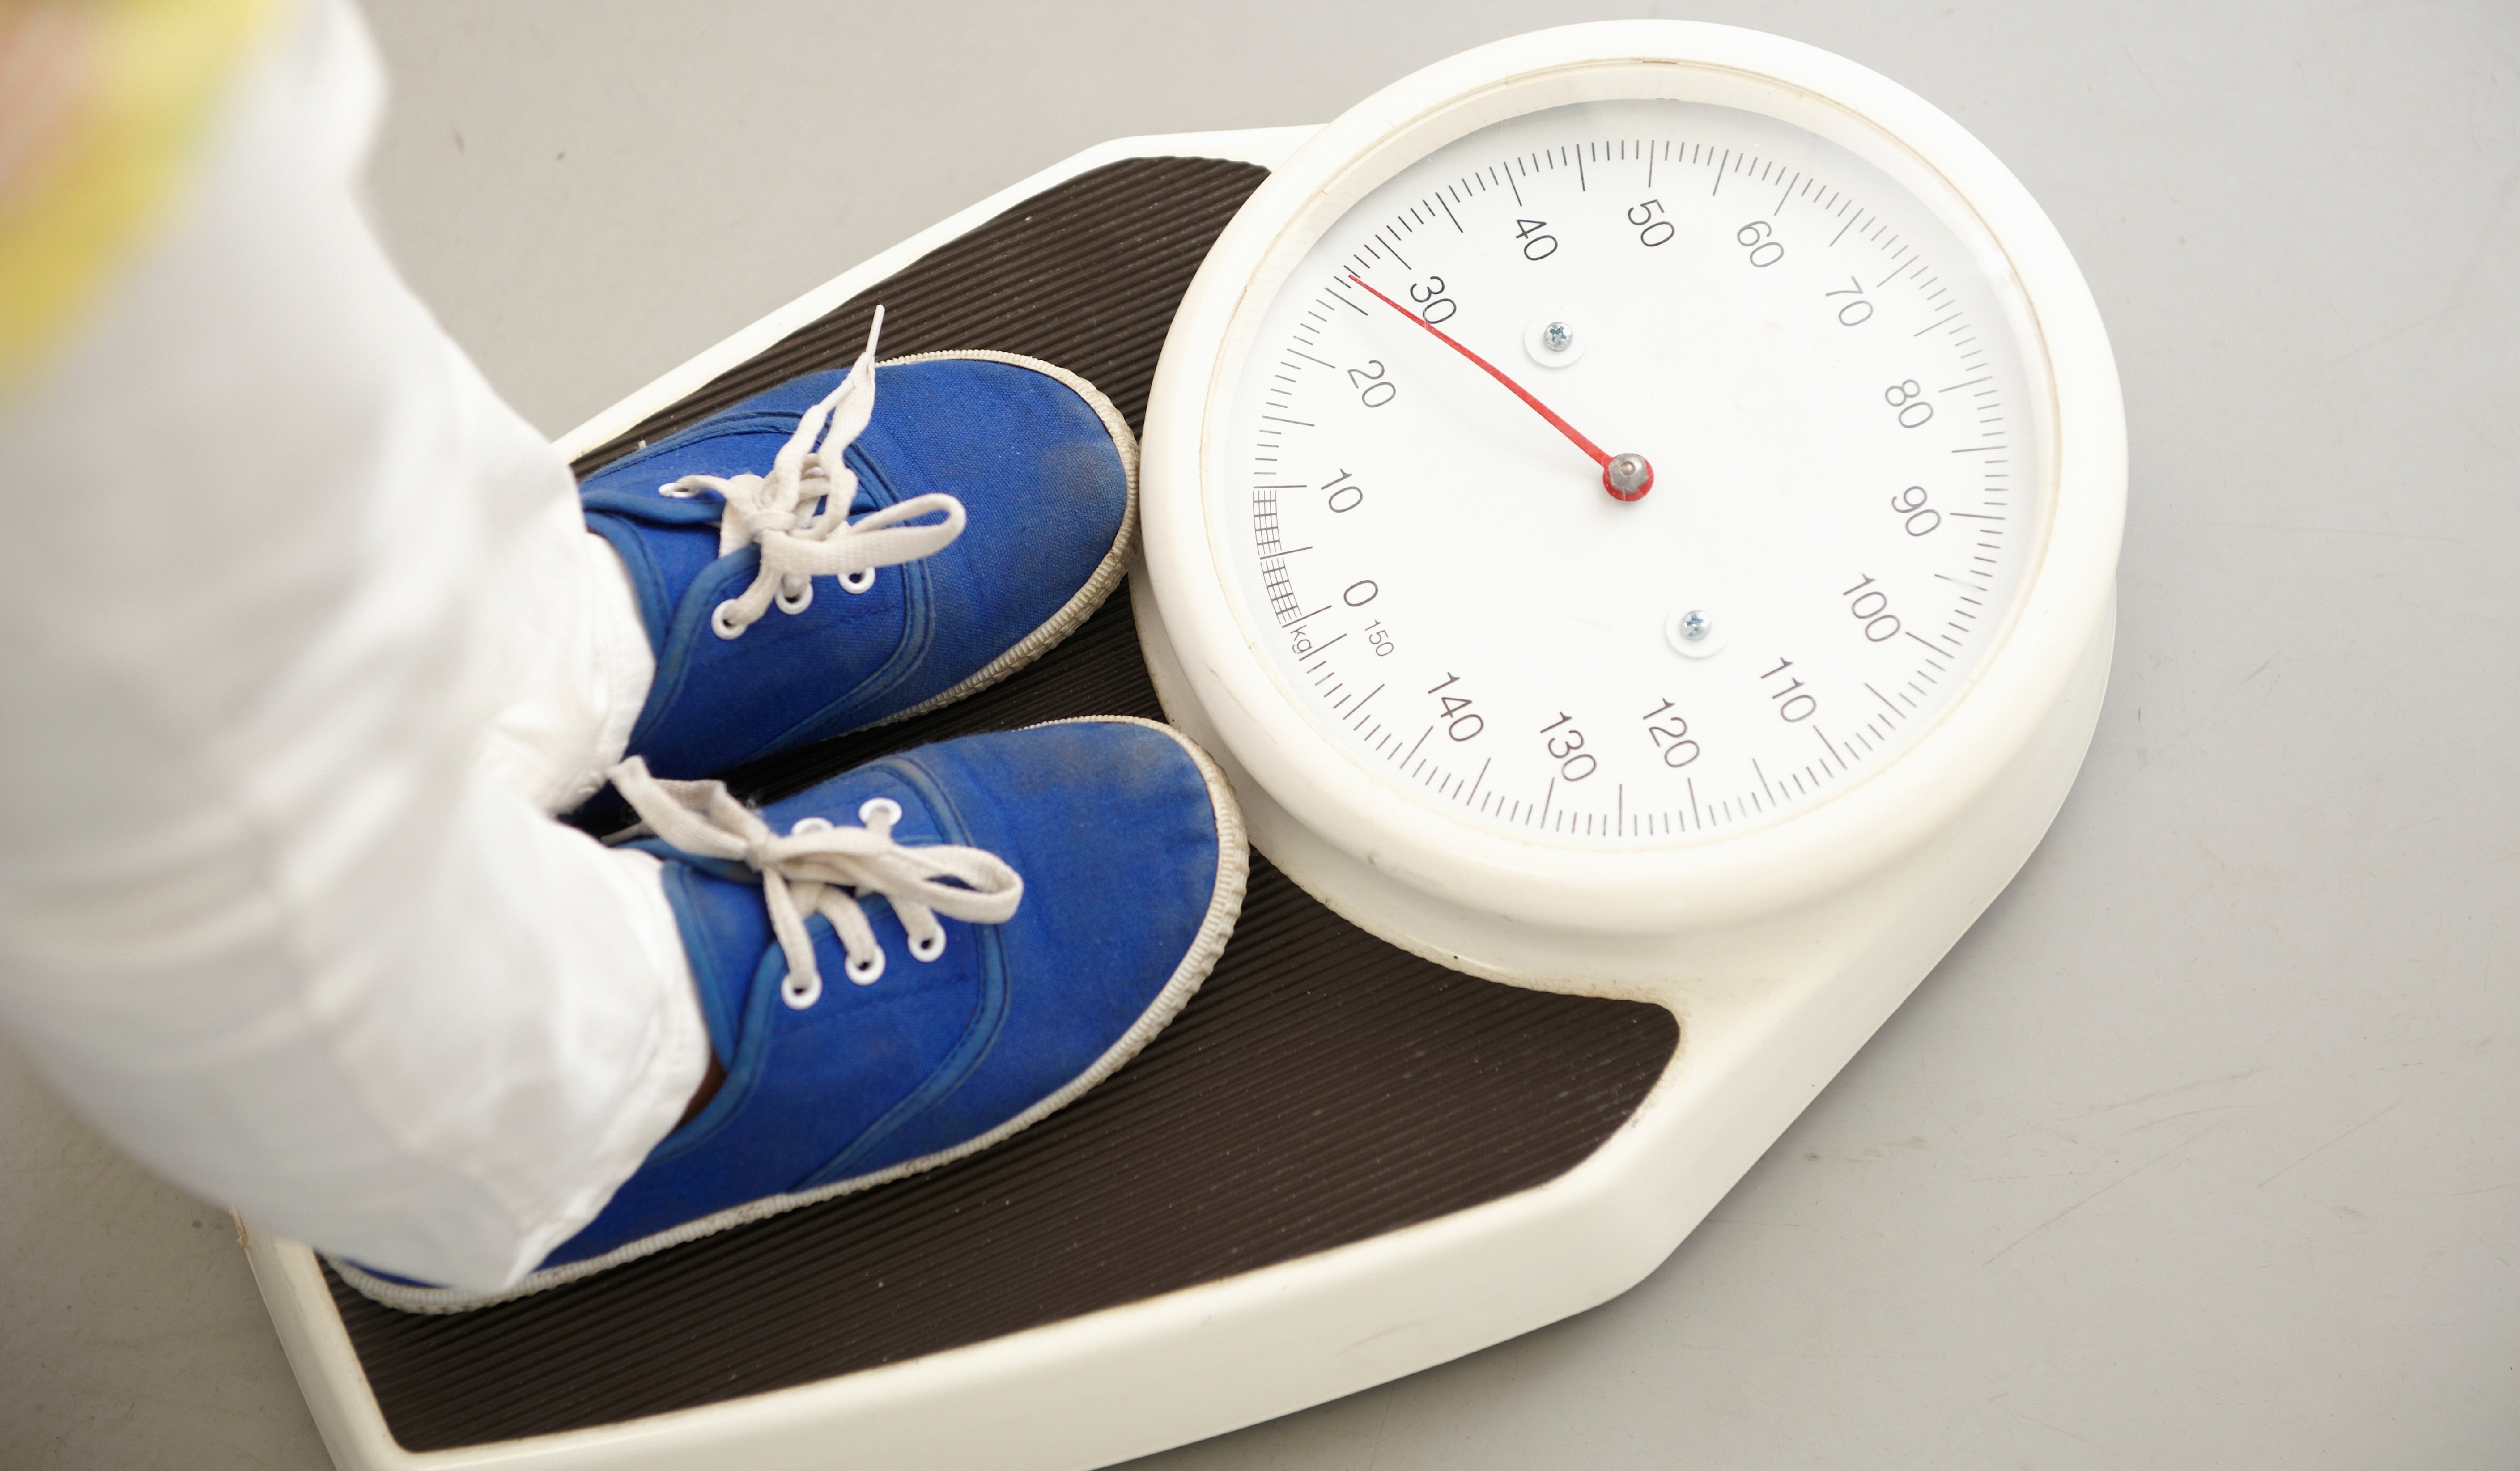 Kingston obesity rate is lowest in England